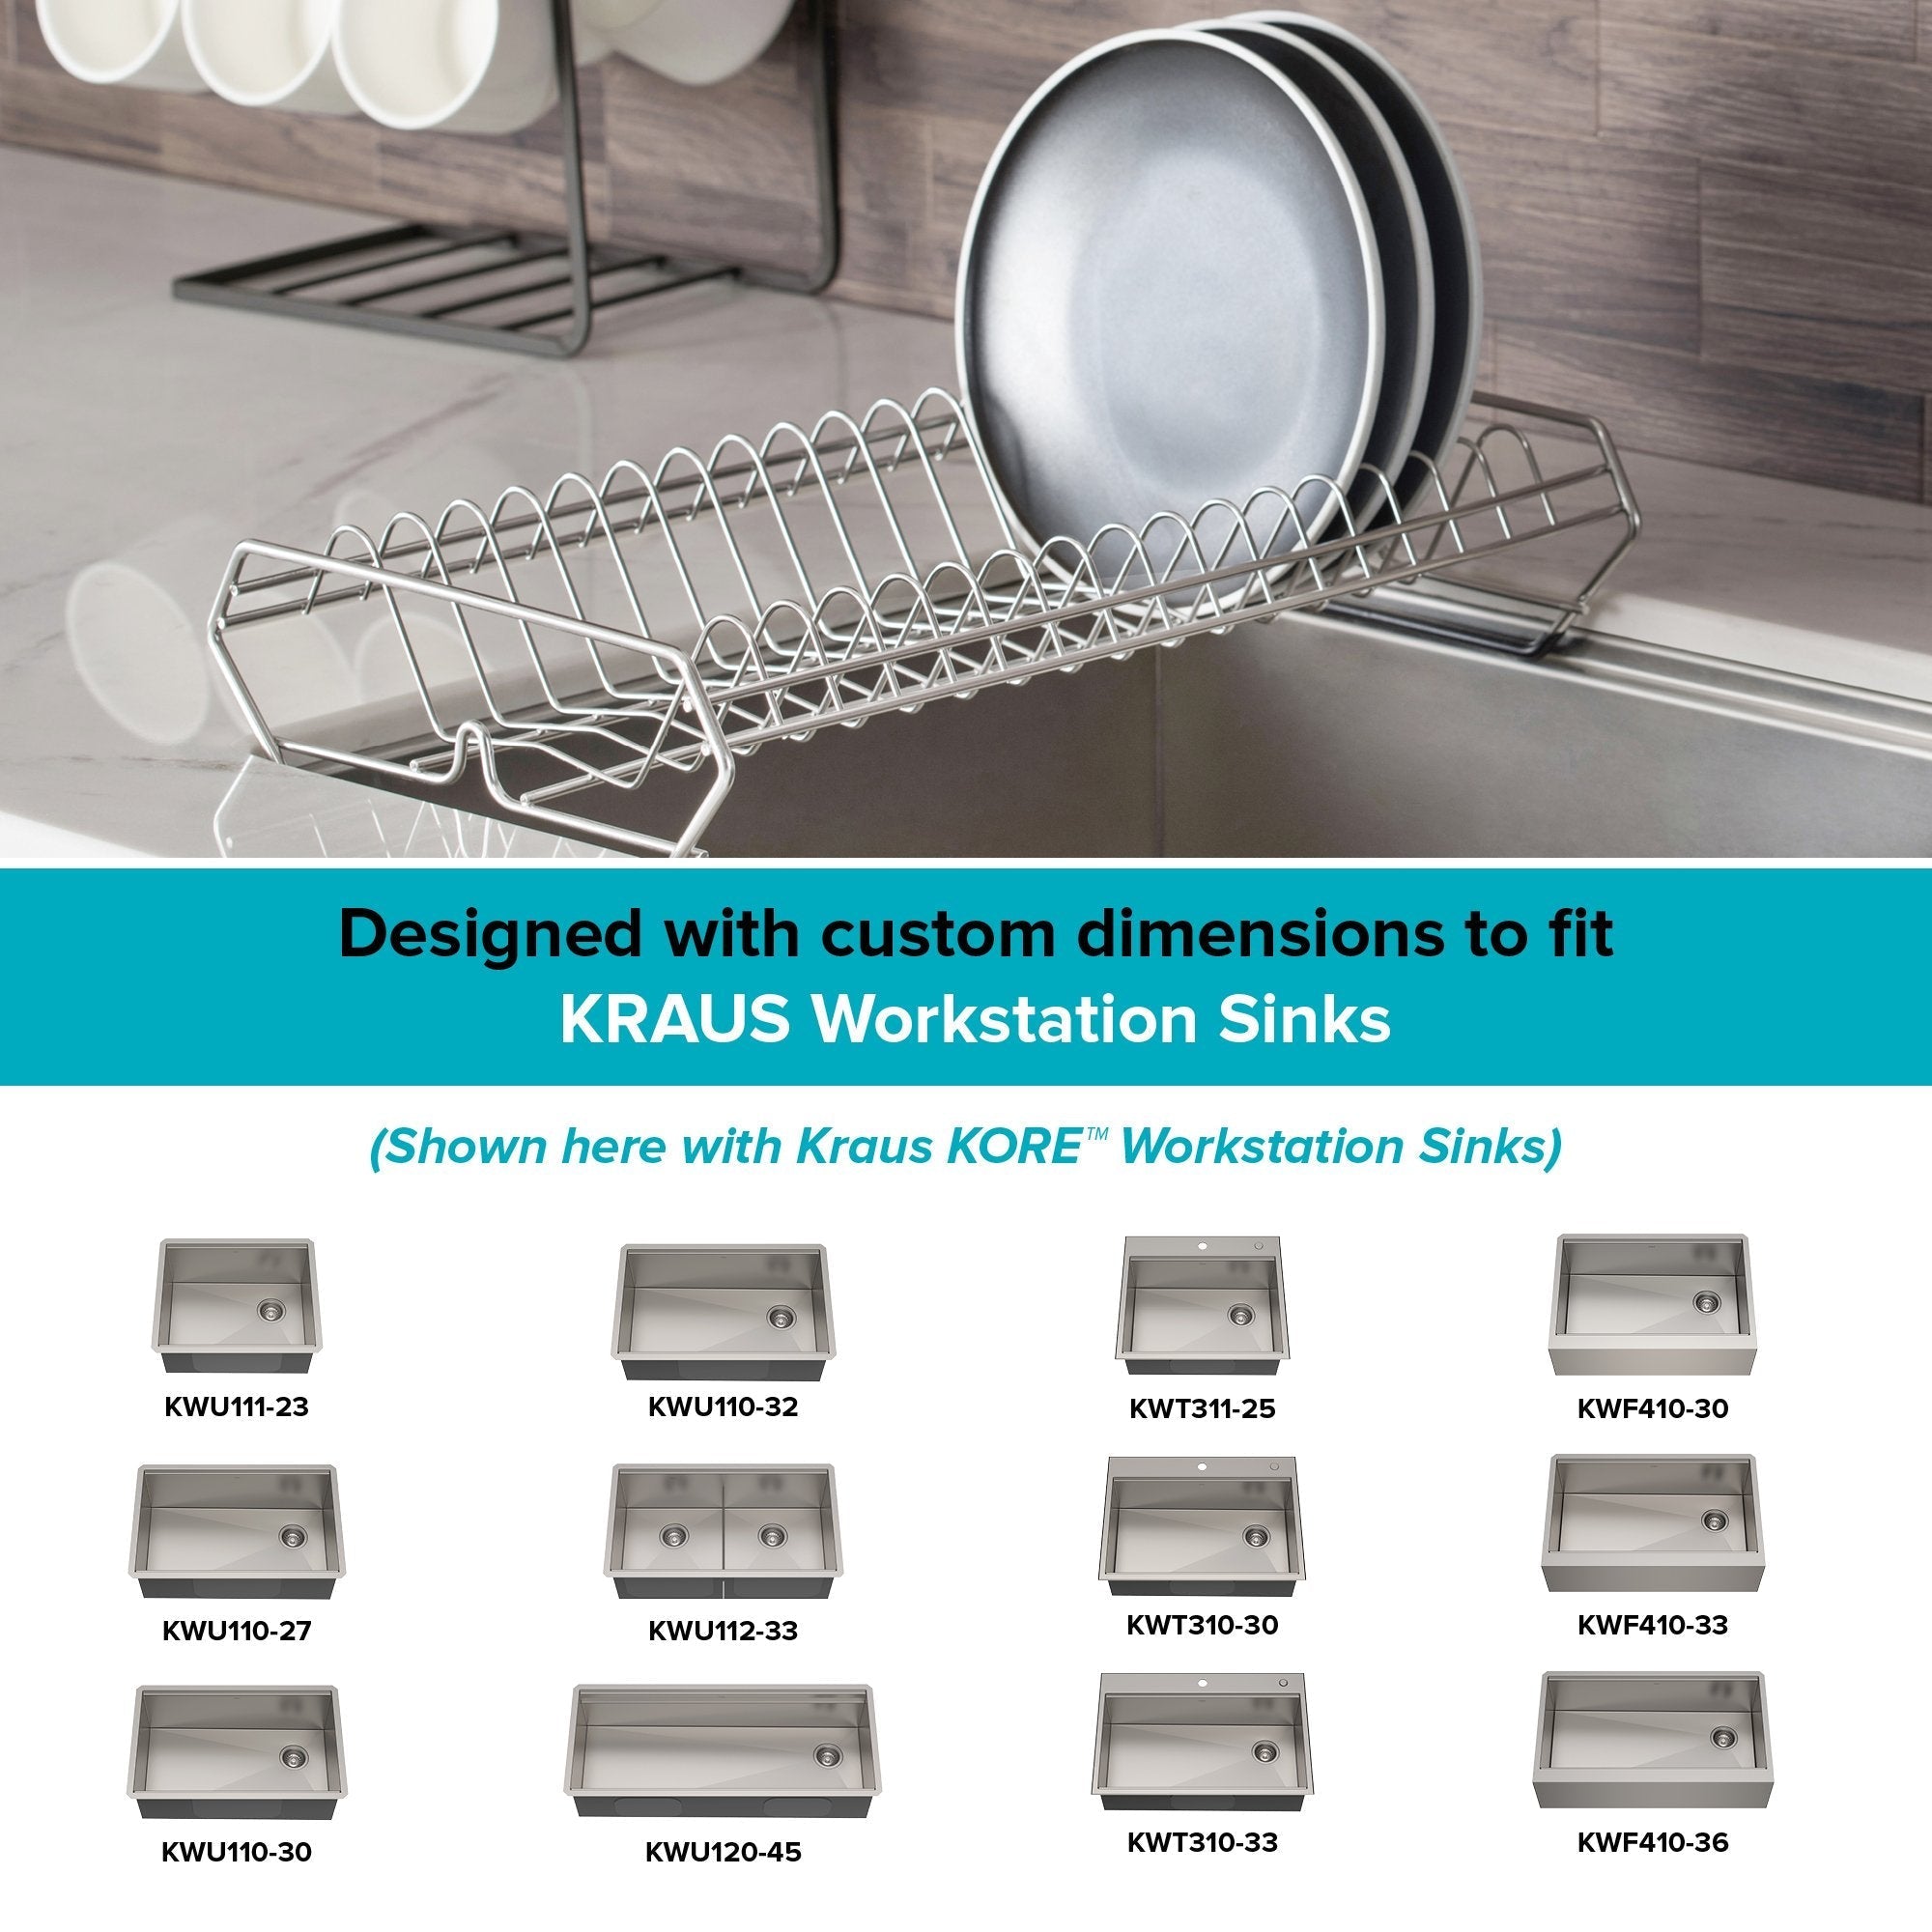 Multifunction Drying Rack Stainless Steel Kitchen Cup Holder